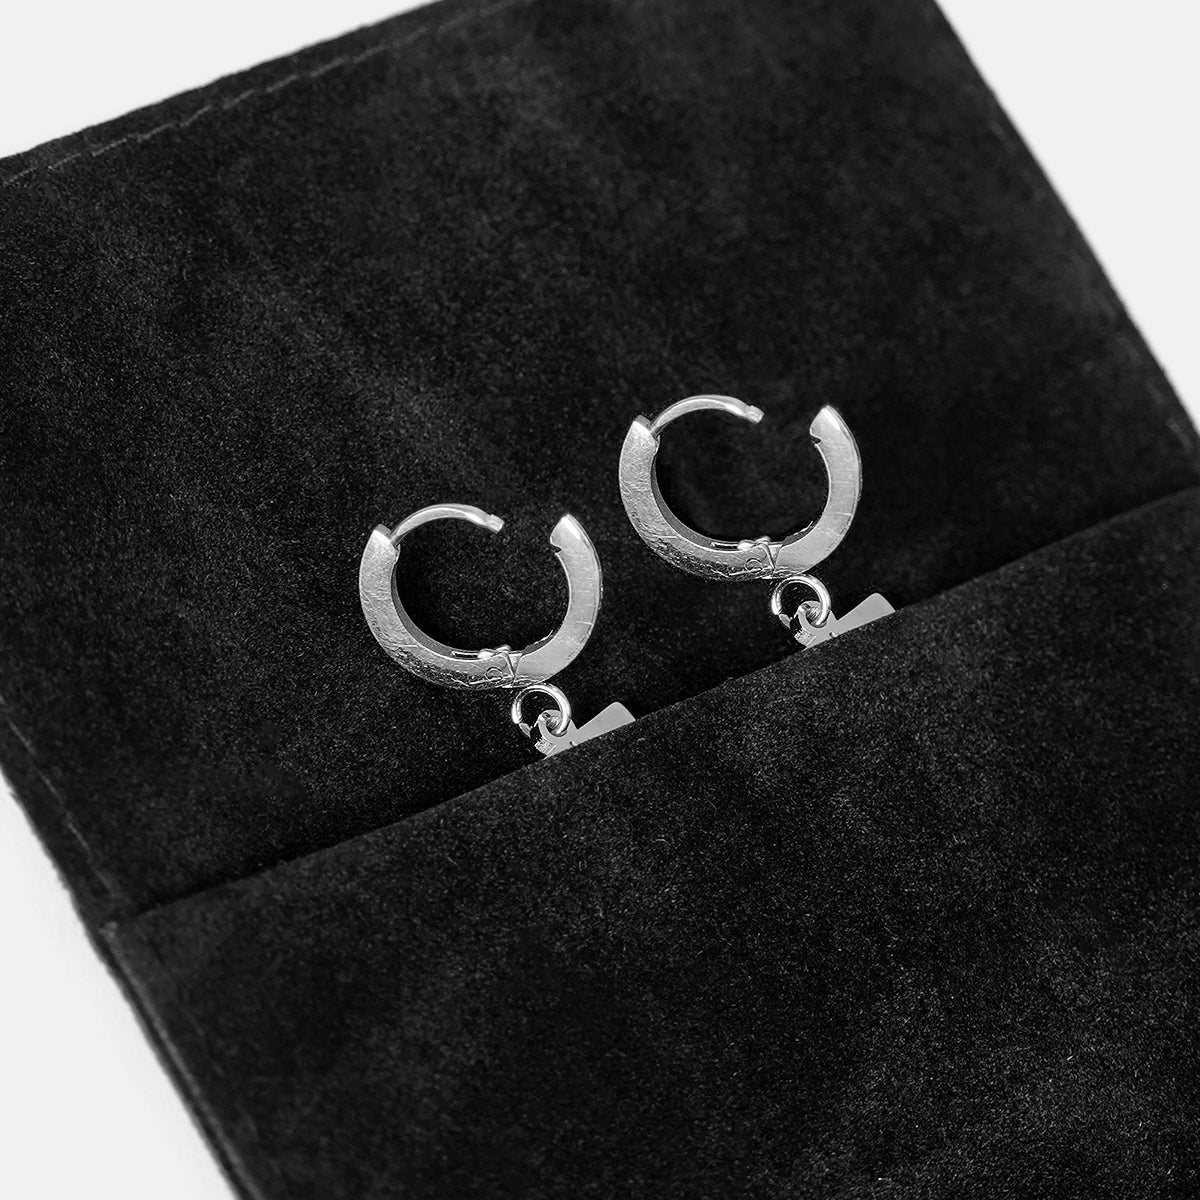 57 Number Earring - Stainless Steel